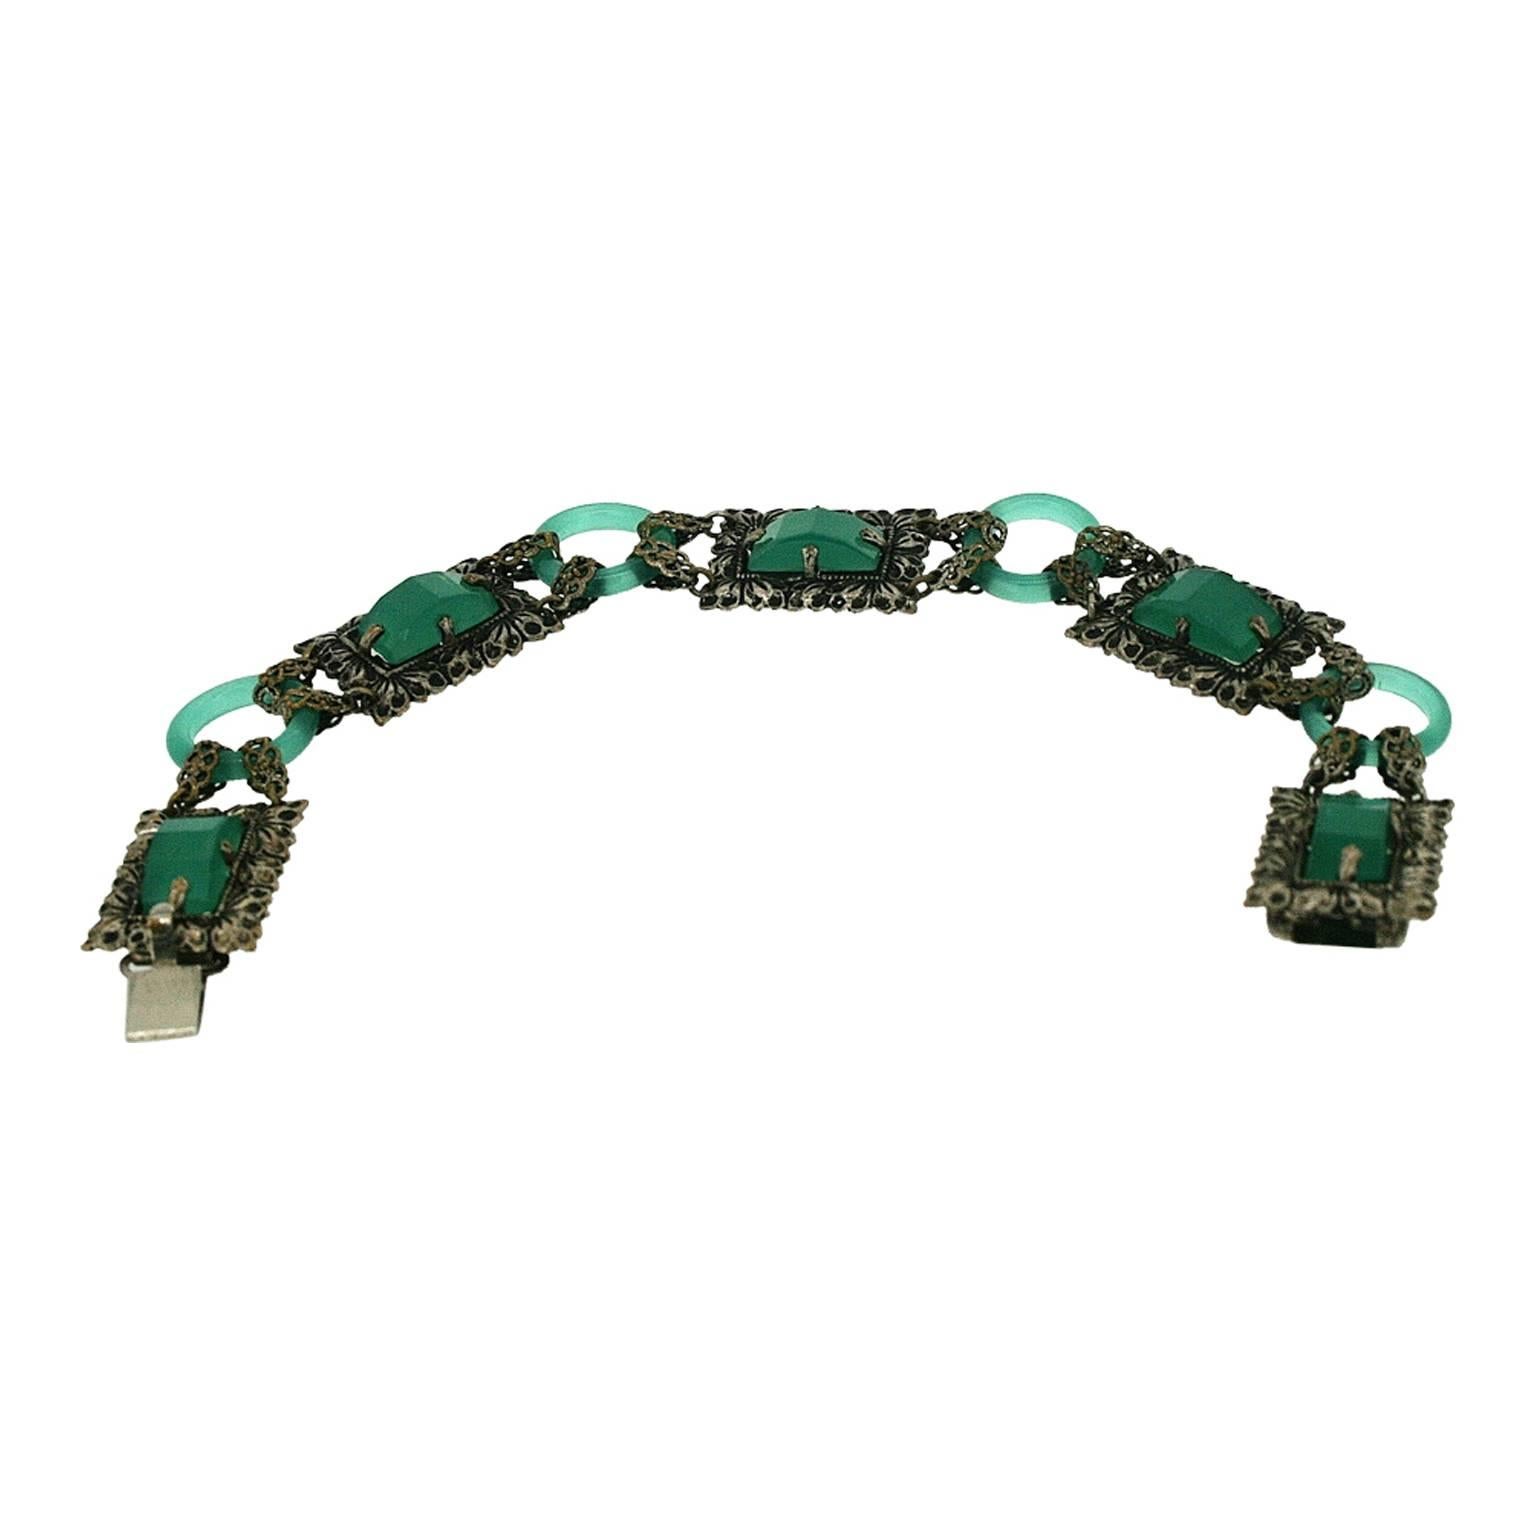 This bracelet dates from the 1920s and is unsigned. It features beautiful green glass panels. 
Condition Report:
Very Good - One small chip to the corner of one glass cabochon.  This is consistent with age and use and does not detract from the